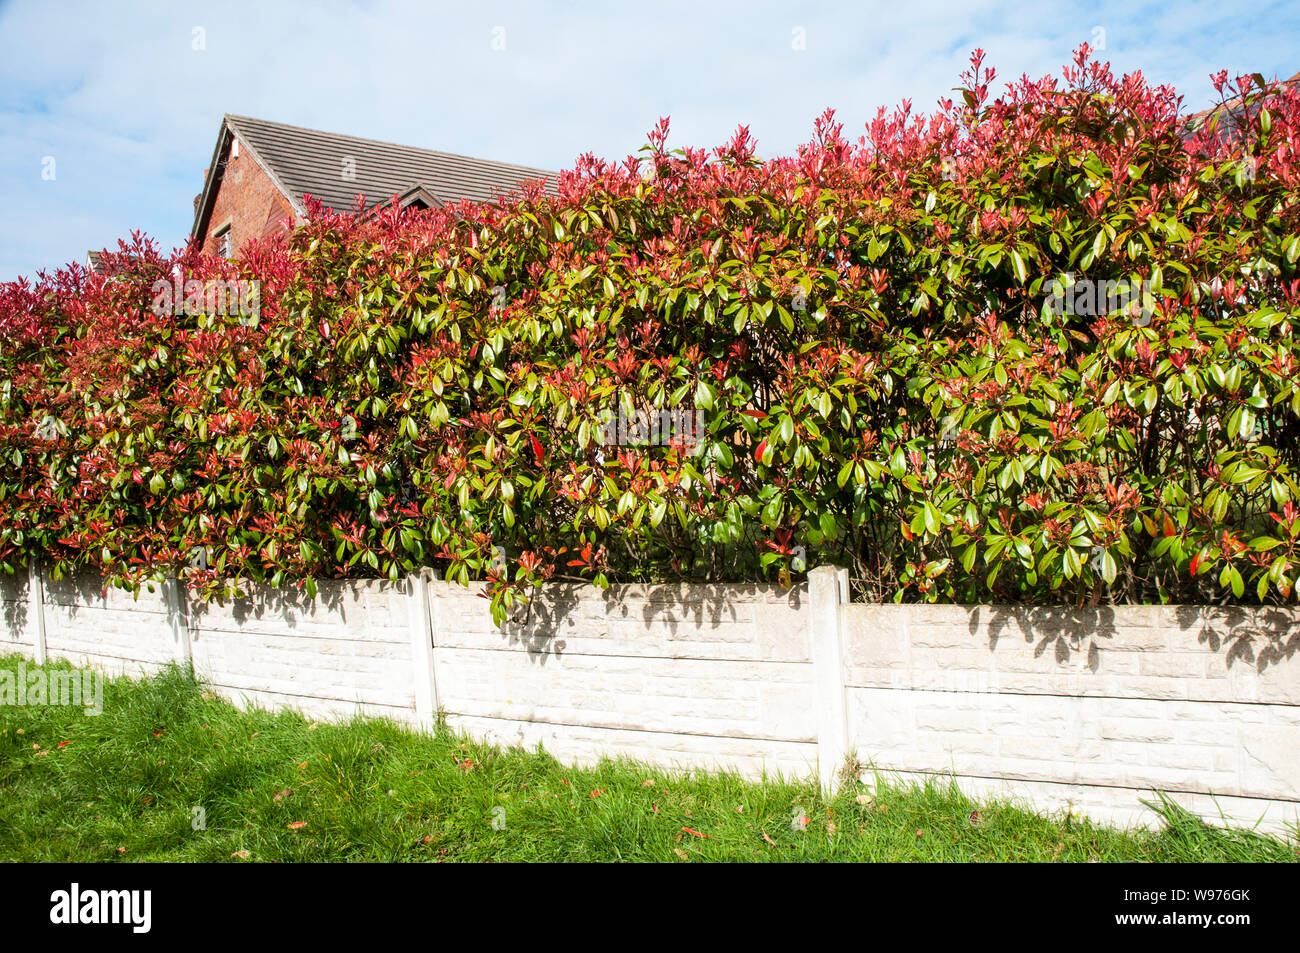 Photinia x fraseir Red Robin showing bright red leaves in early spring and being used as hedging  An evergreen shrub that is frost hjardy Stock Photo